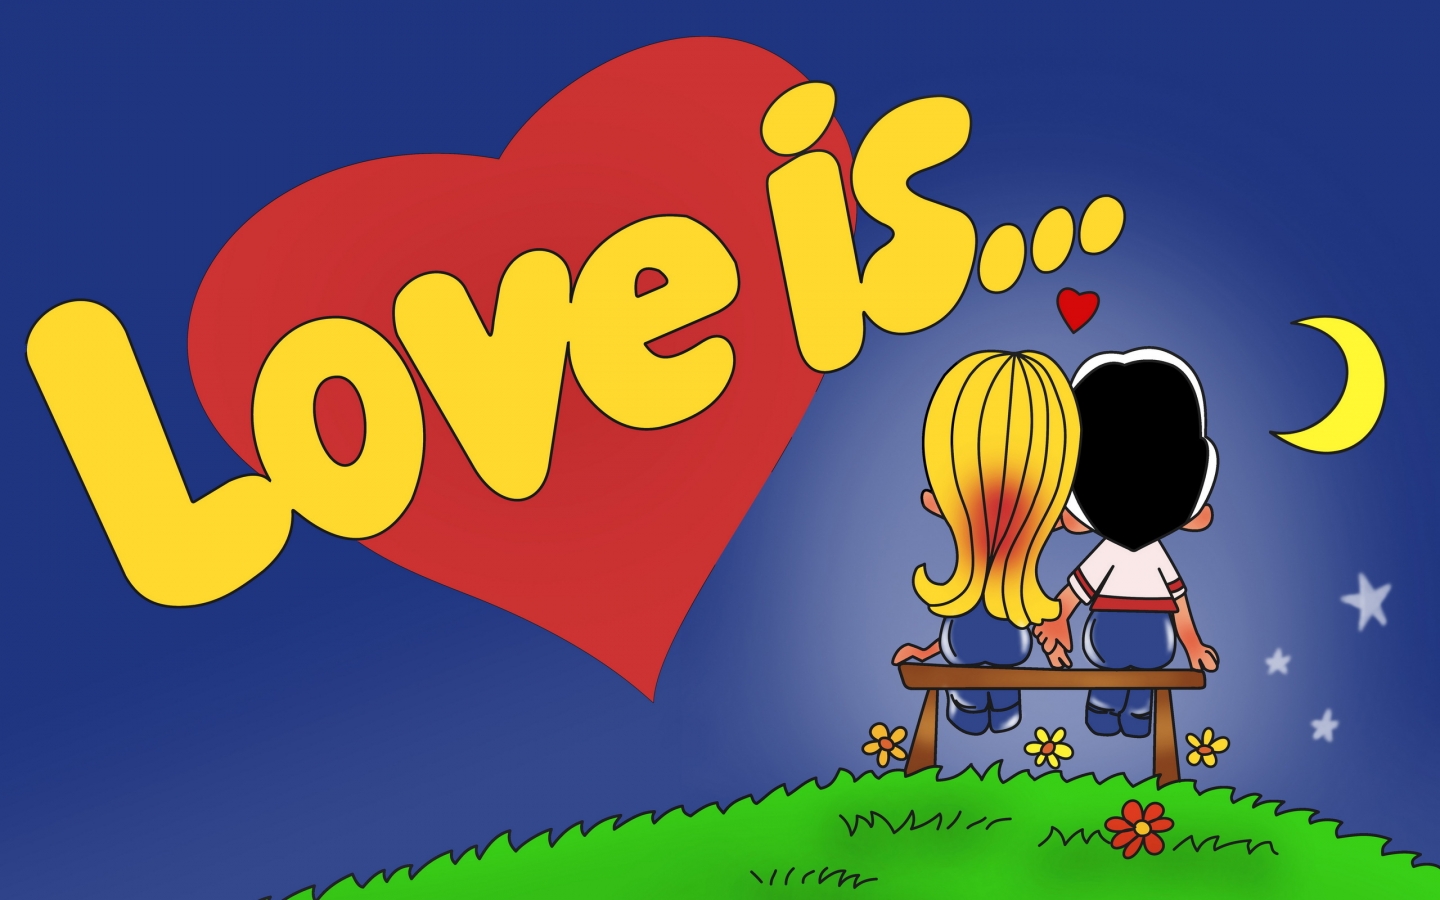 Love is for 1440 x 900 widescreen resolution